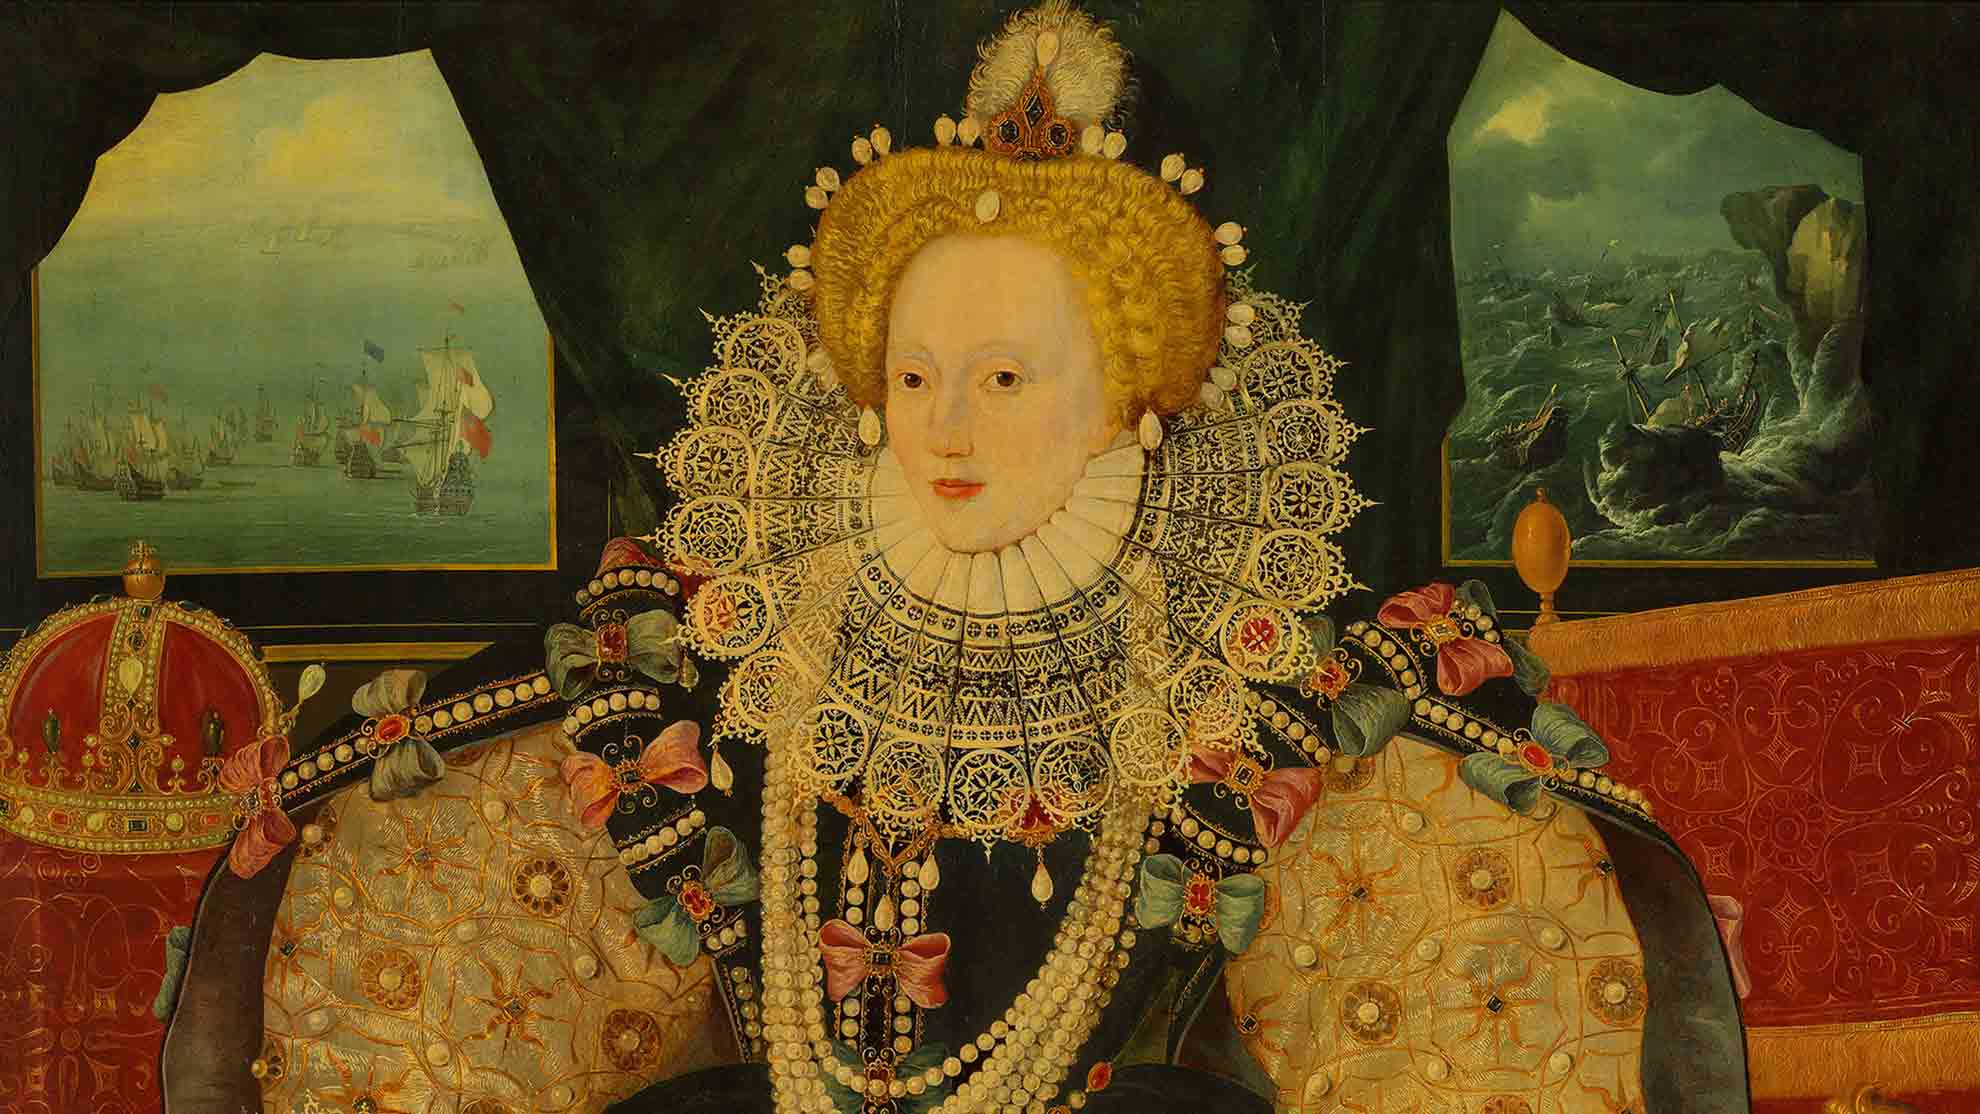 Queen Elizabeth I, The Armada Portrait, painting detail, c.1588, by George Gower at the Woburn Abbey (CC0 1.0)